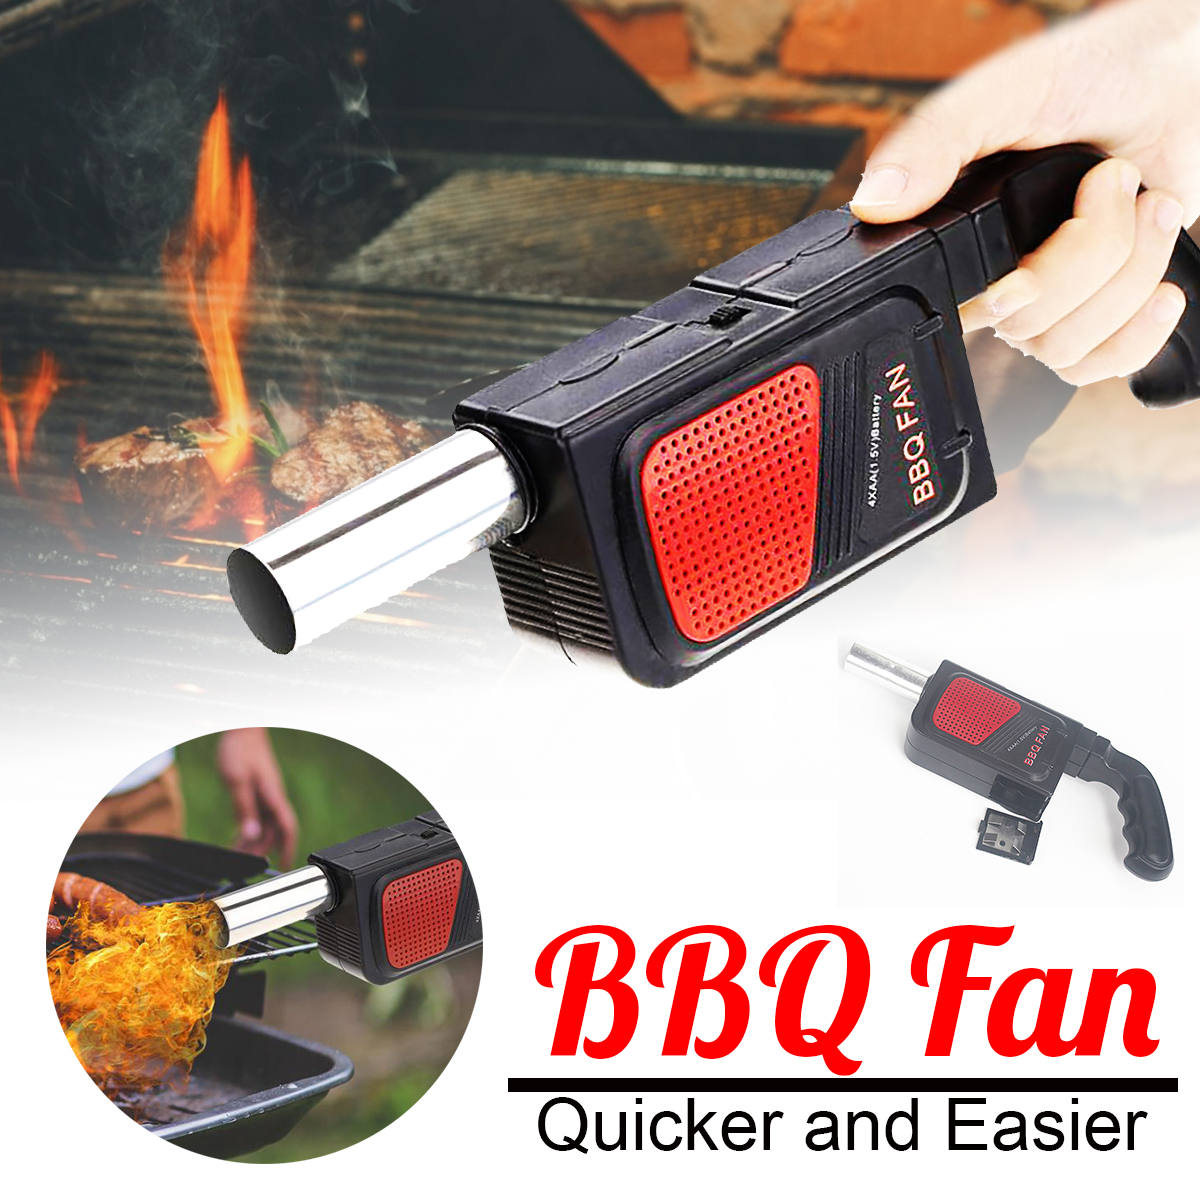 Portable Electric BBQ Fan Air Blower For Outdoor Camping Picnic Barbecue Kits 